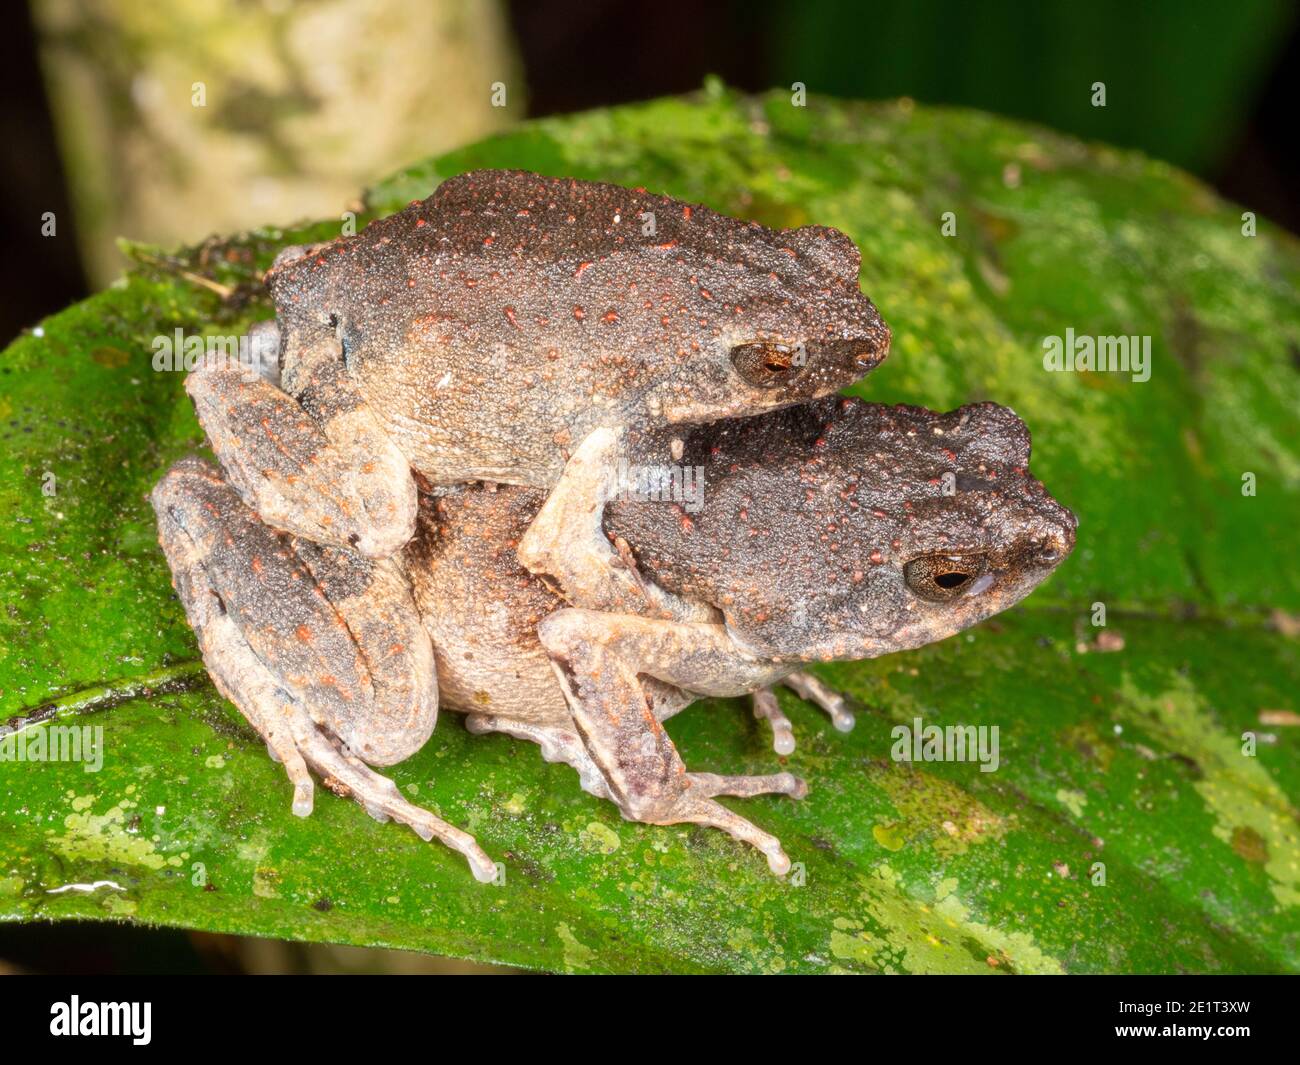 Peters' Dwarf Frog (Engystomops petersi). Pair in amplexus (mating) in the rainforest in the Ecuadorian Amazon. Stock Photo